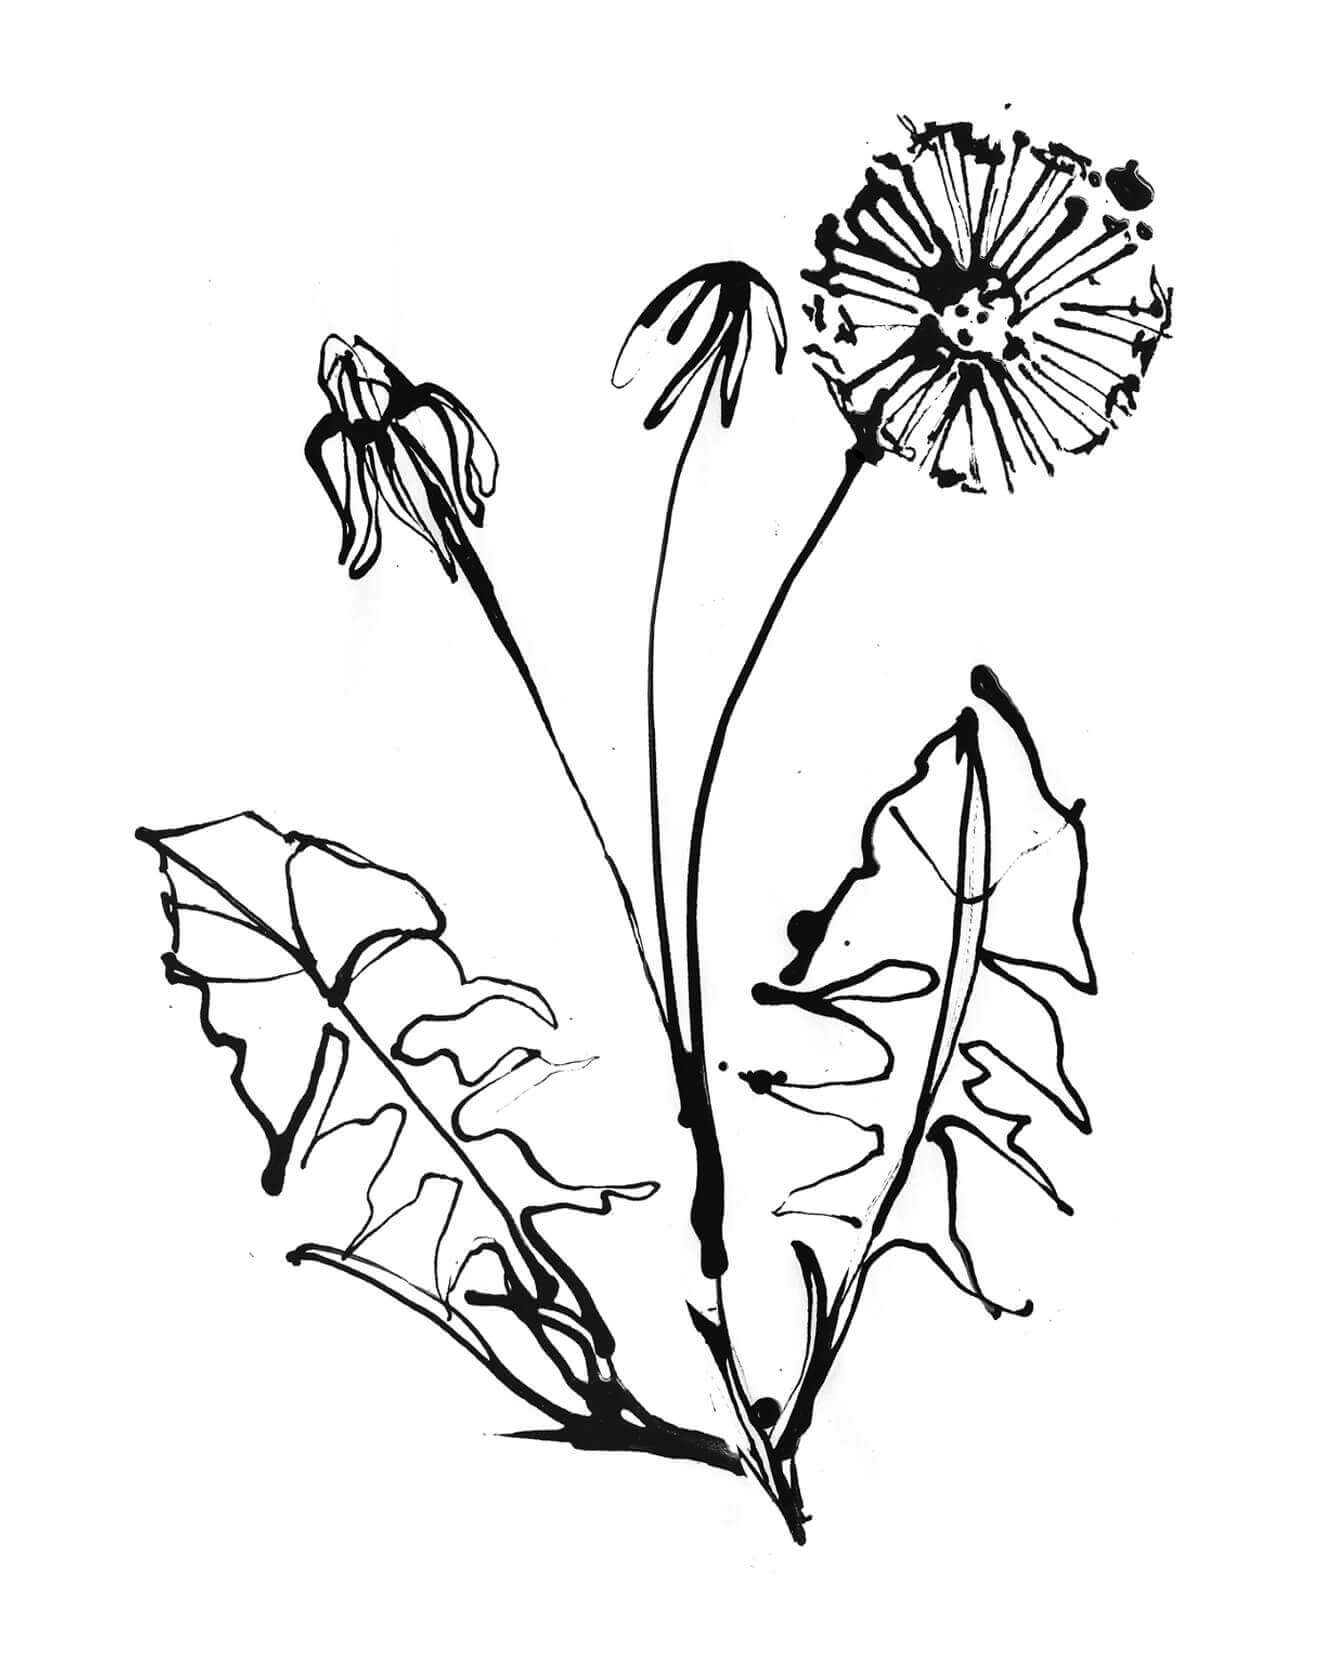 Sketches of a dandelions, and florals. The work in progress for the line artwork for an illustrated label for a hot toddy kit for interior agency Meadquin, part of a pack sent to clients for Christmas. Capturing a dandelion ink ink.A simple line artwork for an illustrated label for a hot toddy kit for interior agency Meadquin, part of a pack sent to clients for Christmas. Capturing a dandelion ink.